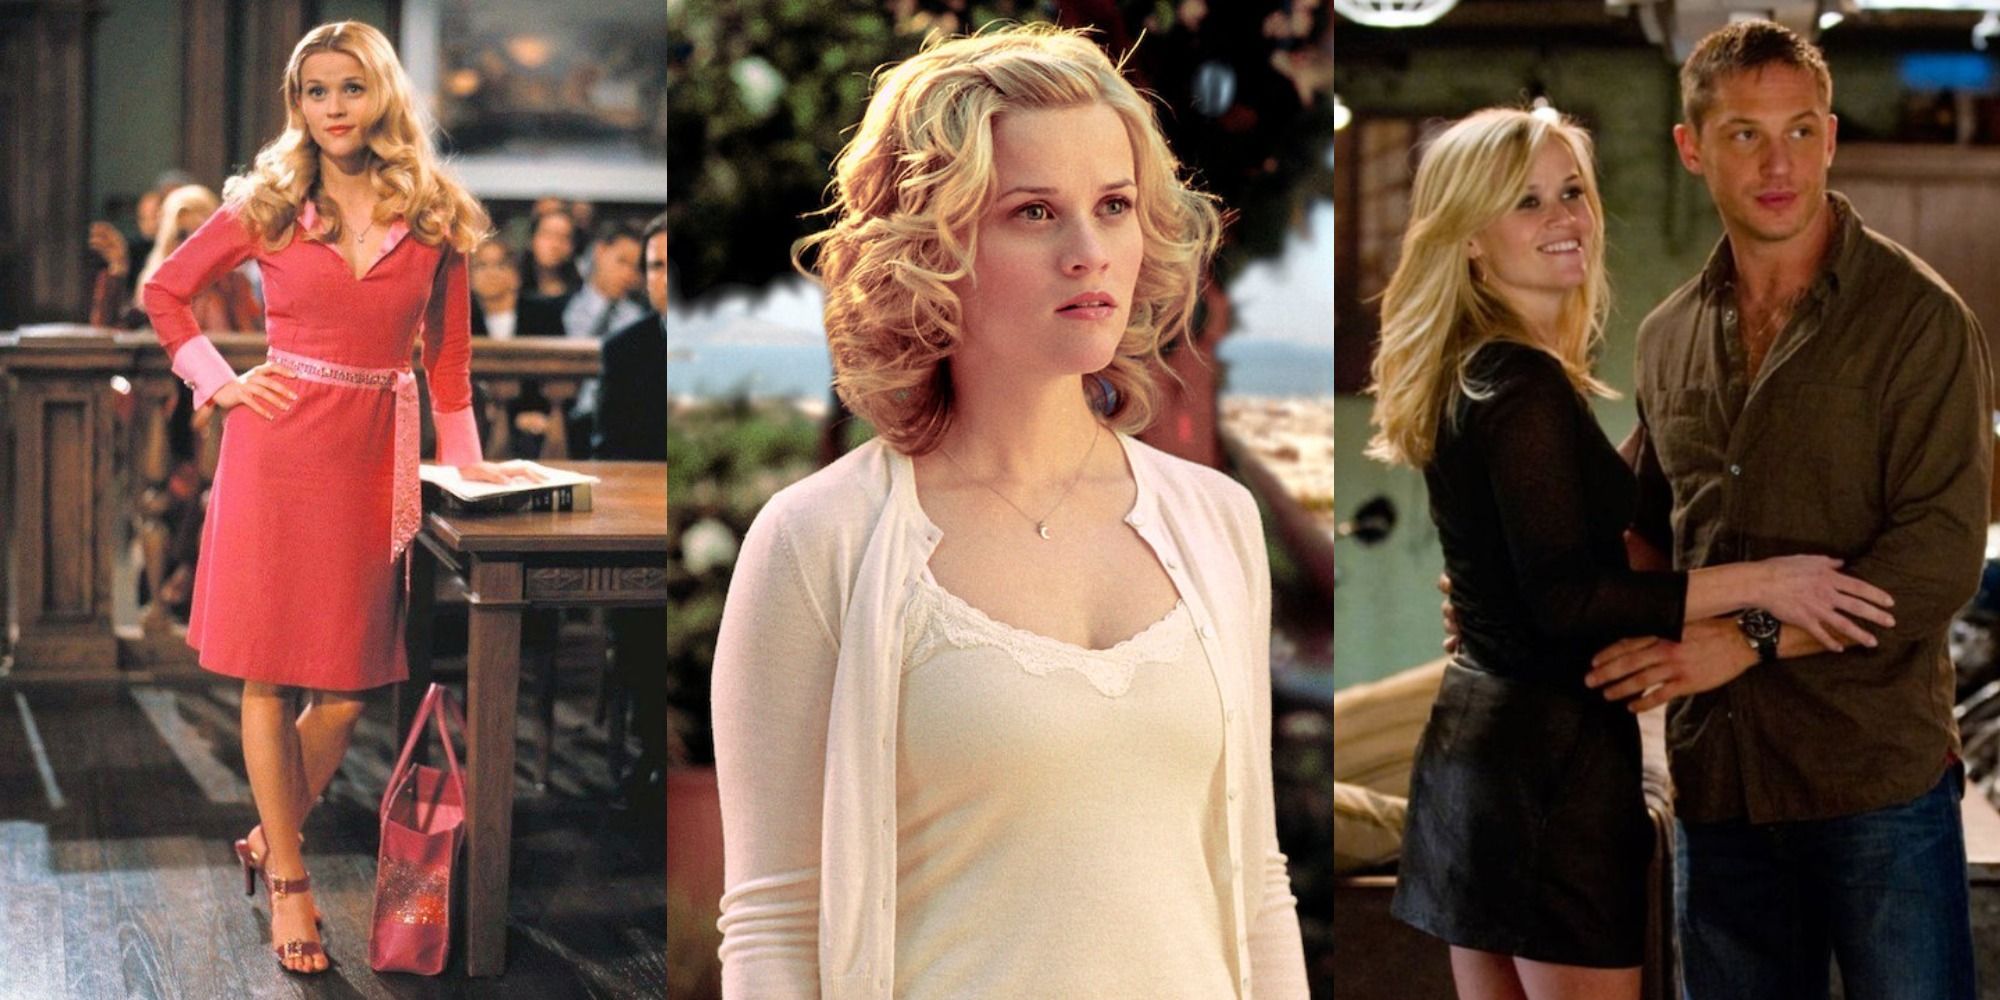 Reese Witherspoon in Legally Blonde, Just Like Heaven, and This Means War